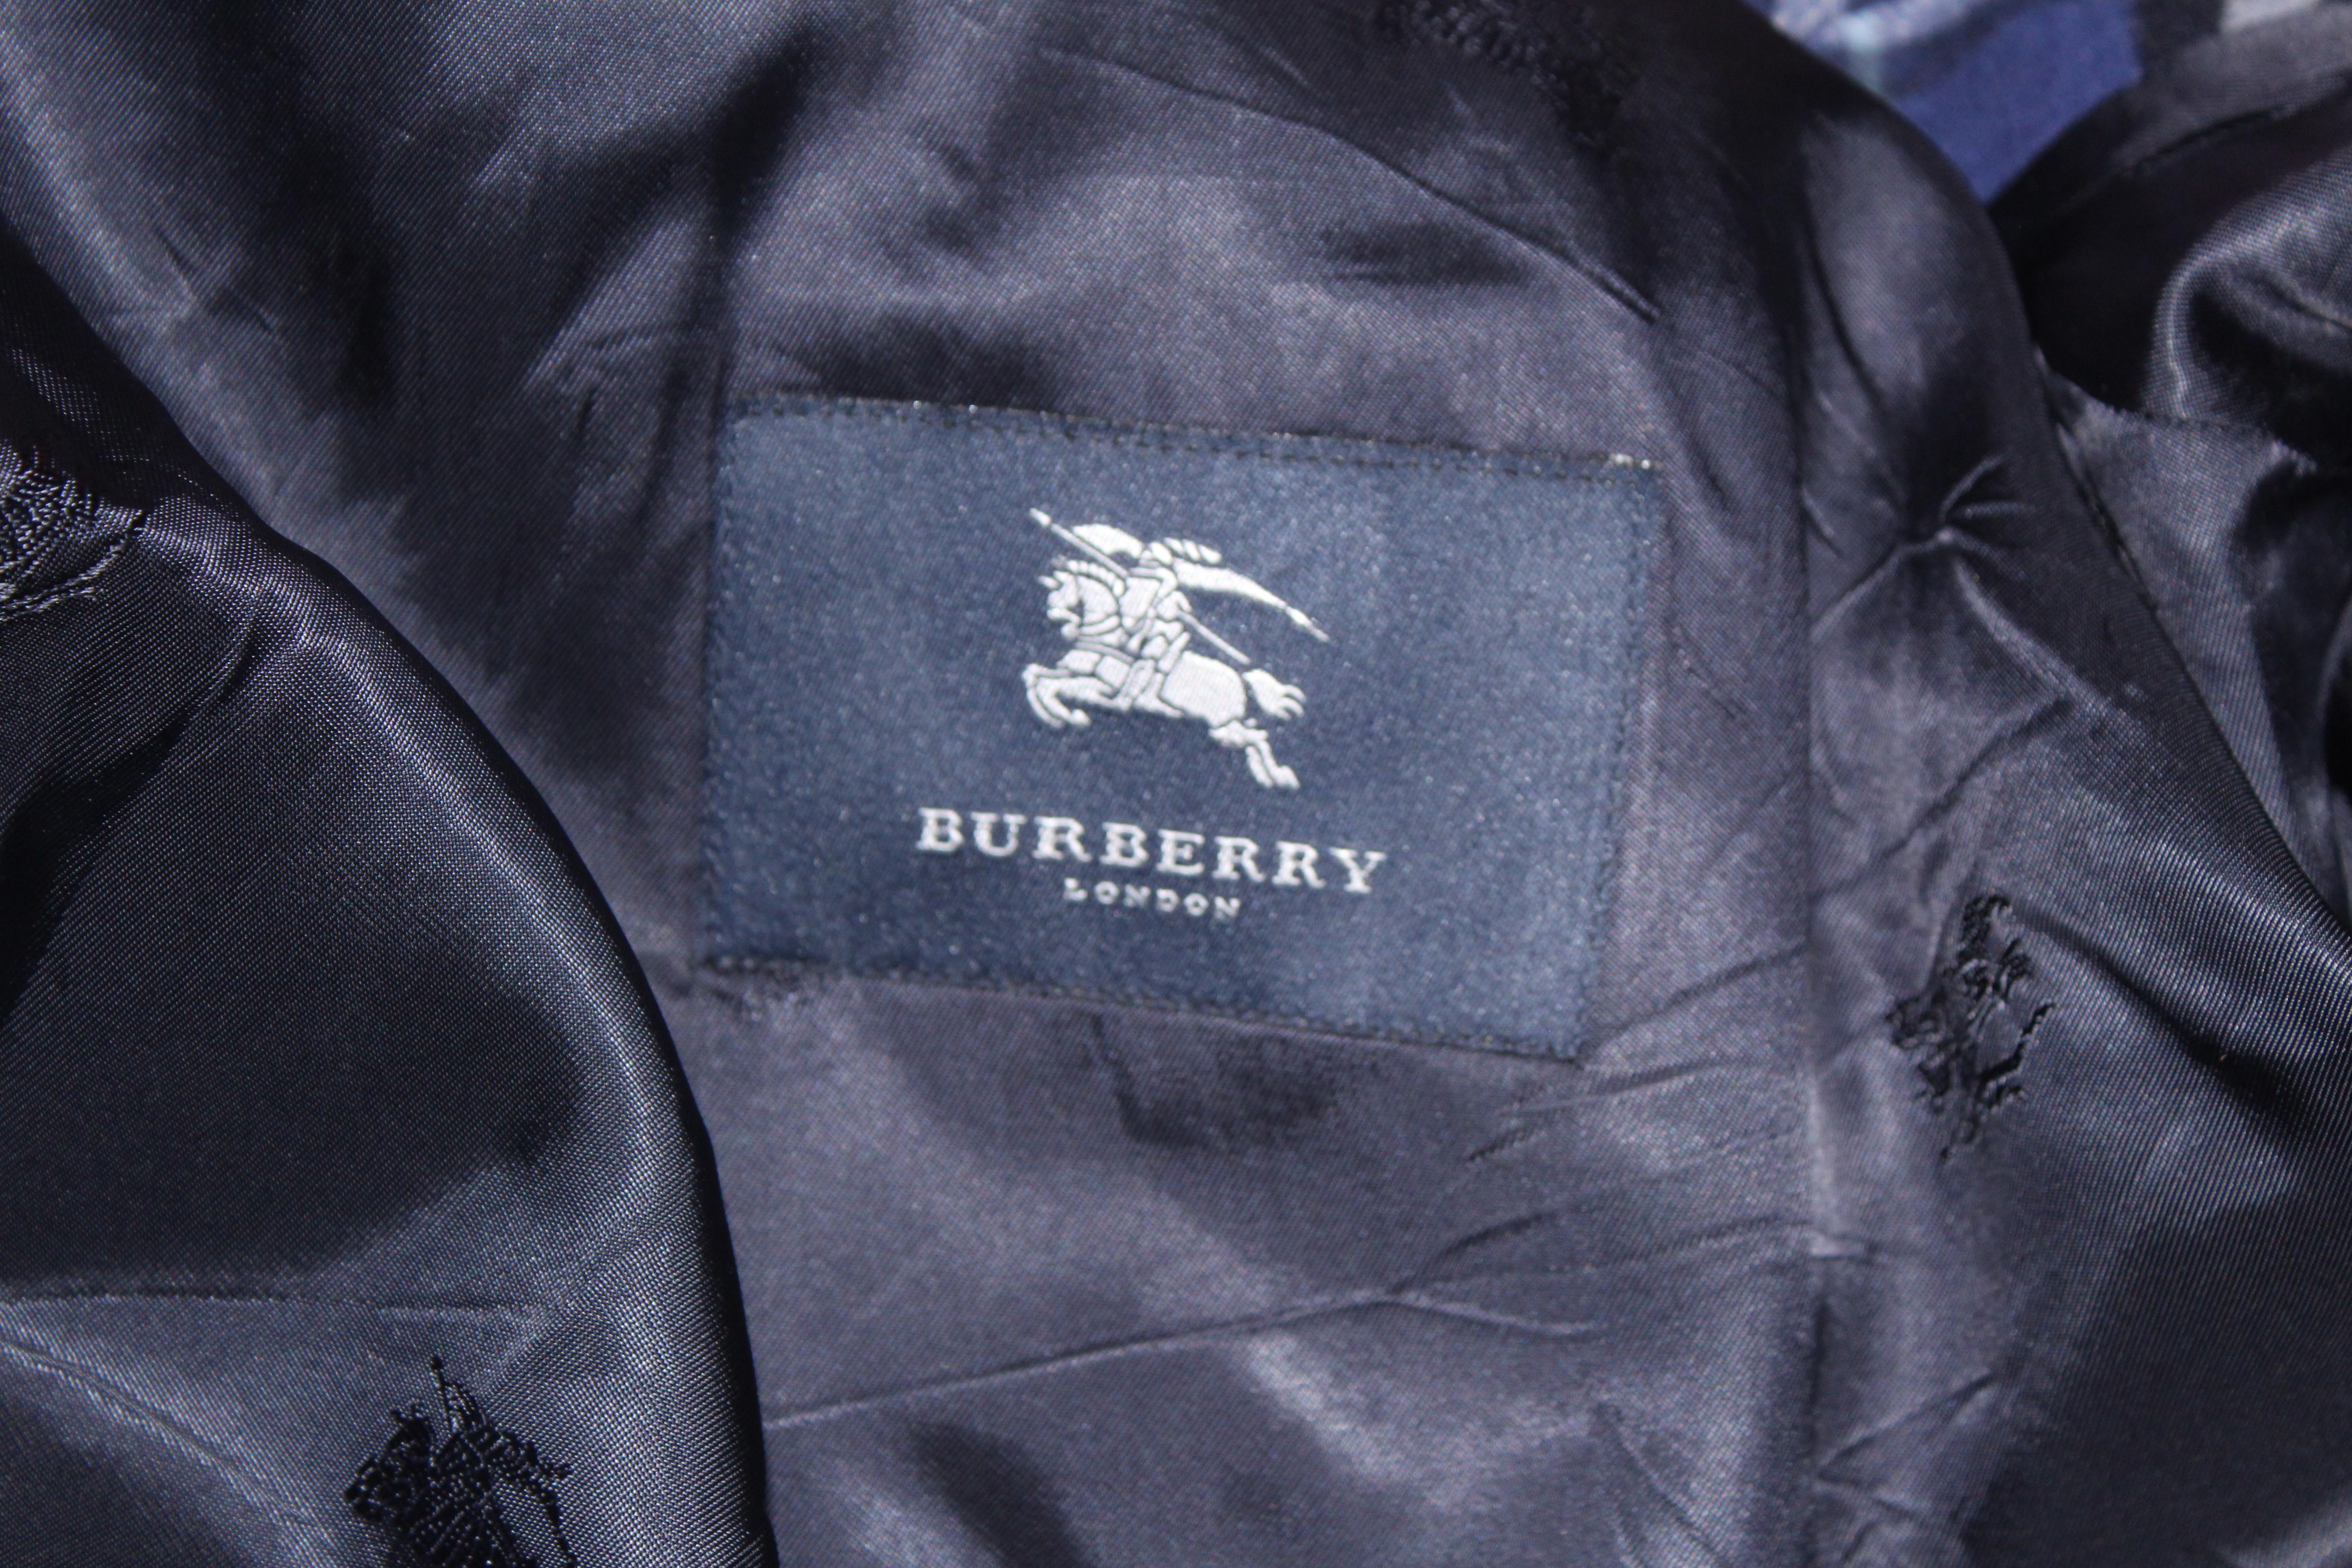 Burberry Women's Double Breasted Coat in Blue Check, c. 2000's, size 6 US For Sale 6